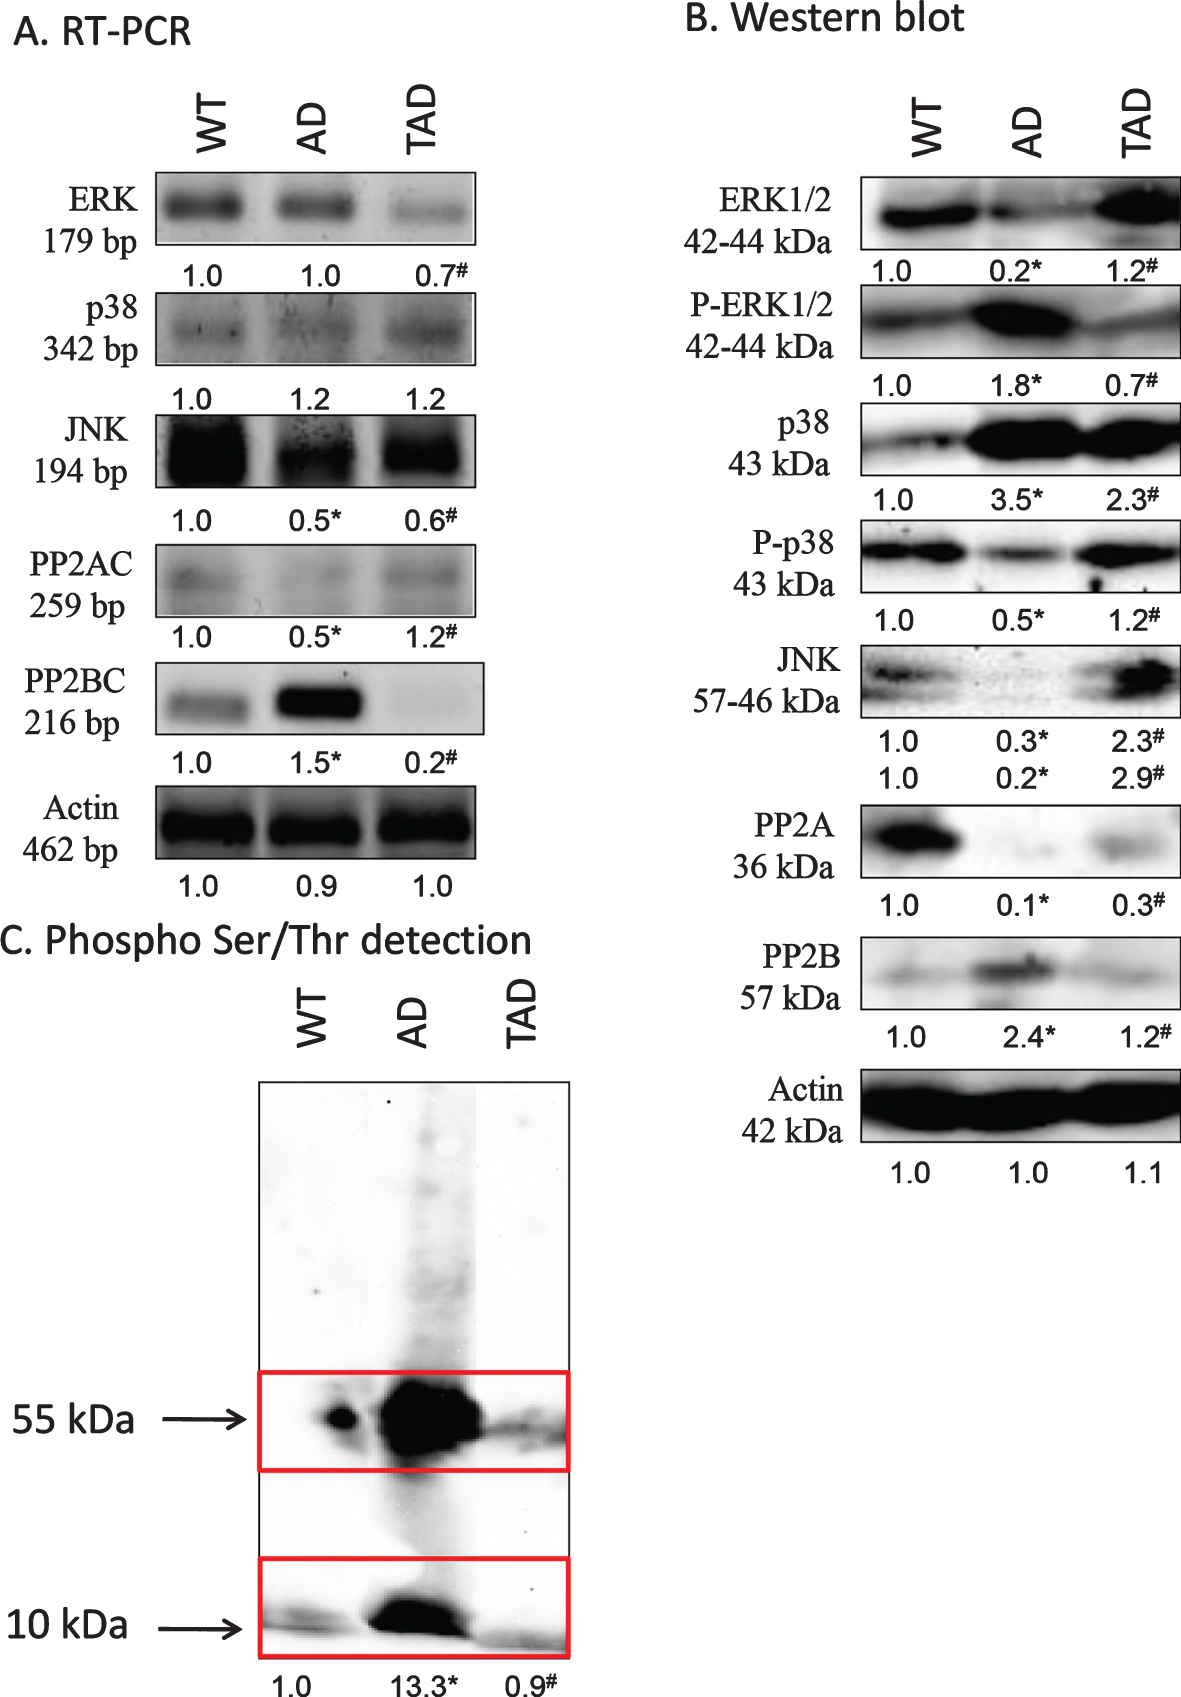 mRNA (A) and protein (B) expression of non-canonical signaling elements of TGFβ pathways in the kidney. For RT-PCR and for western blot reactions, actin was used as control. C) Ser/Thr phosphorylation was investigated by western blot analysis. Insert represents the molecular weight approximately 55 and 10 kDa. Optical density of signals was measured and results were normalized to the optical density of controls. For panels A-C, numbers below the signals represent integrated densities of signals determined by ImageJ software. Asterisks indicate significant alteration of expression as compared to wild type (WT) (*p < 0.05) or Alzheimer’s disease (AD) mice (#p < 0.05). Representative data of five independent experiments. For RT-PCR reactions and for western blot actin was used as controls. Statistical analysis was performed by ANOVA. All data were normalized to actin and data are expressed as mean±SEM.